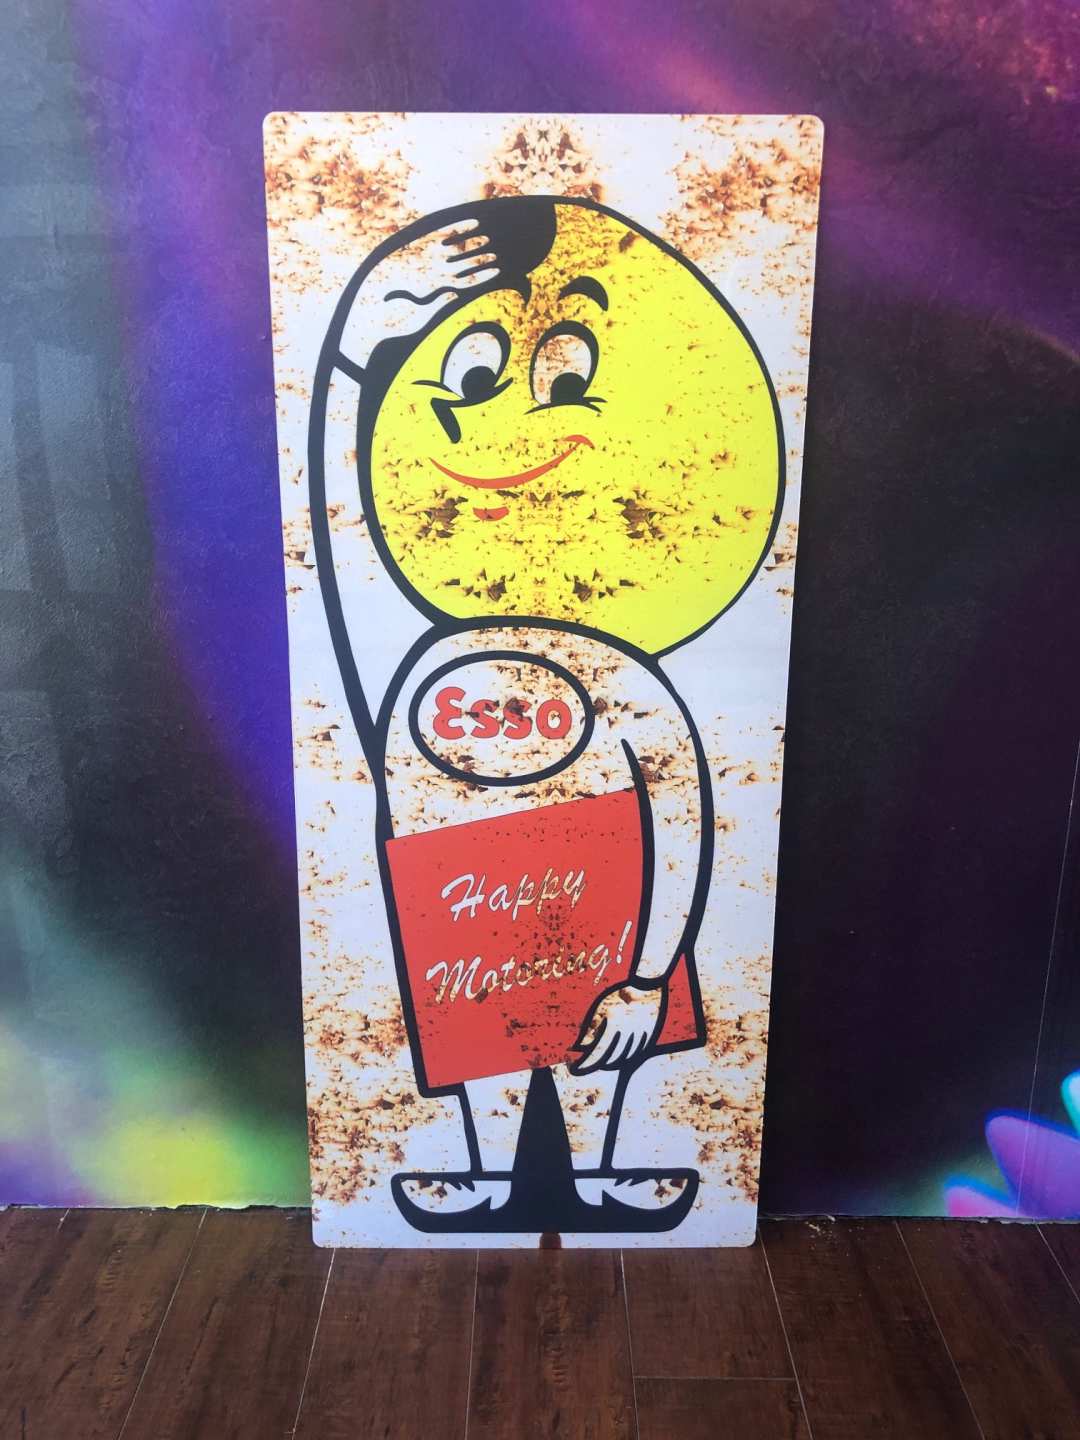 0th Image of a N/A ESSO OIL VINTAGE SIGN